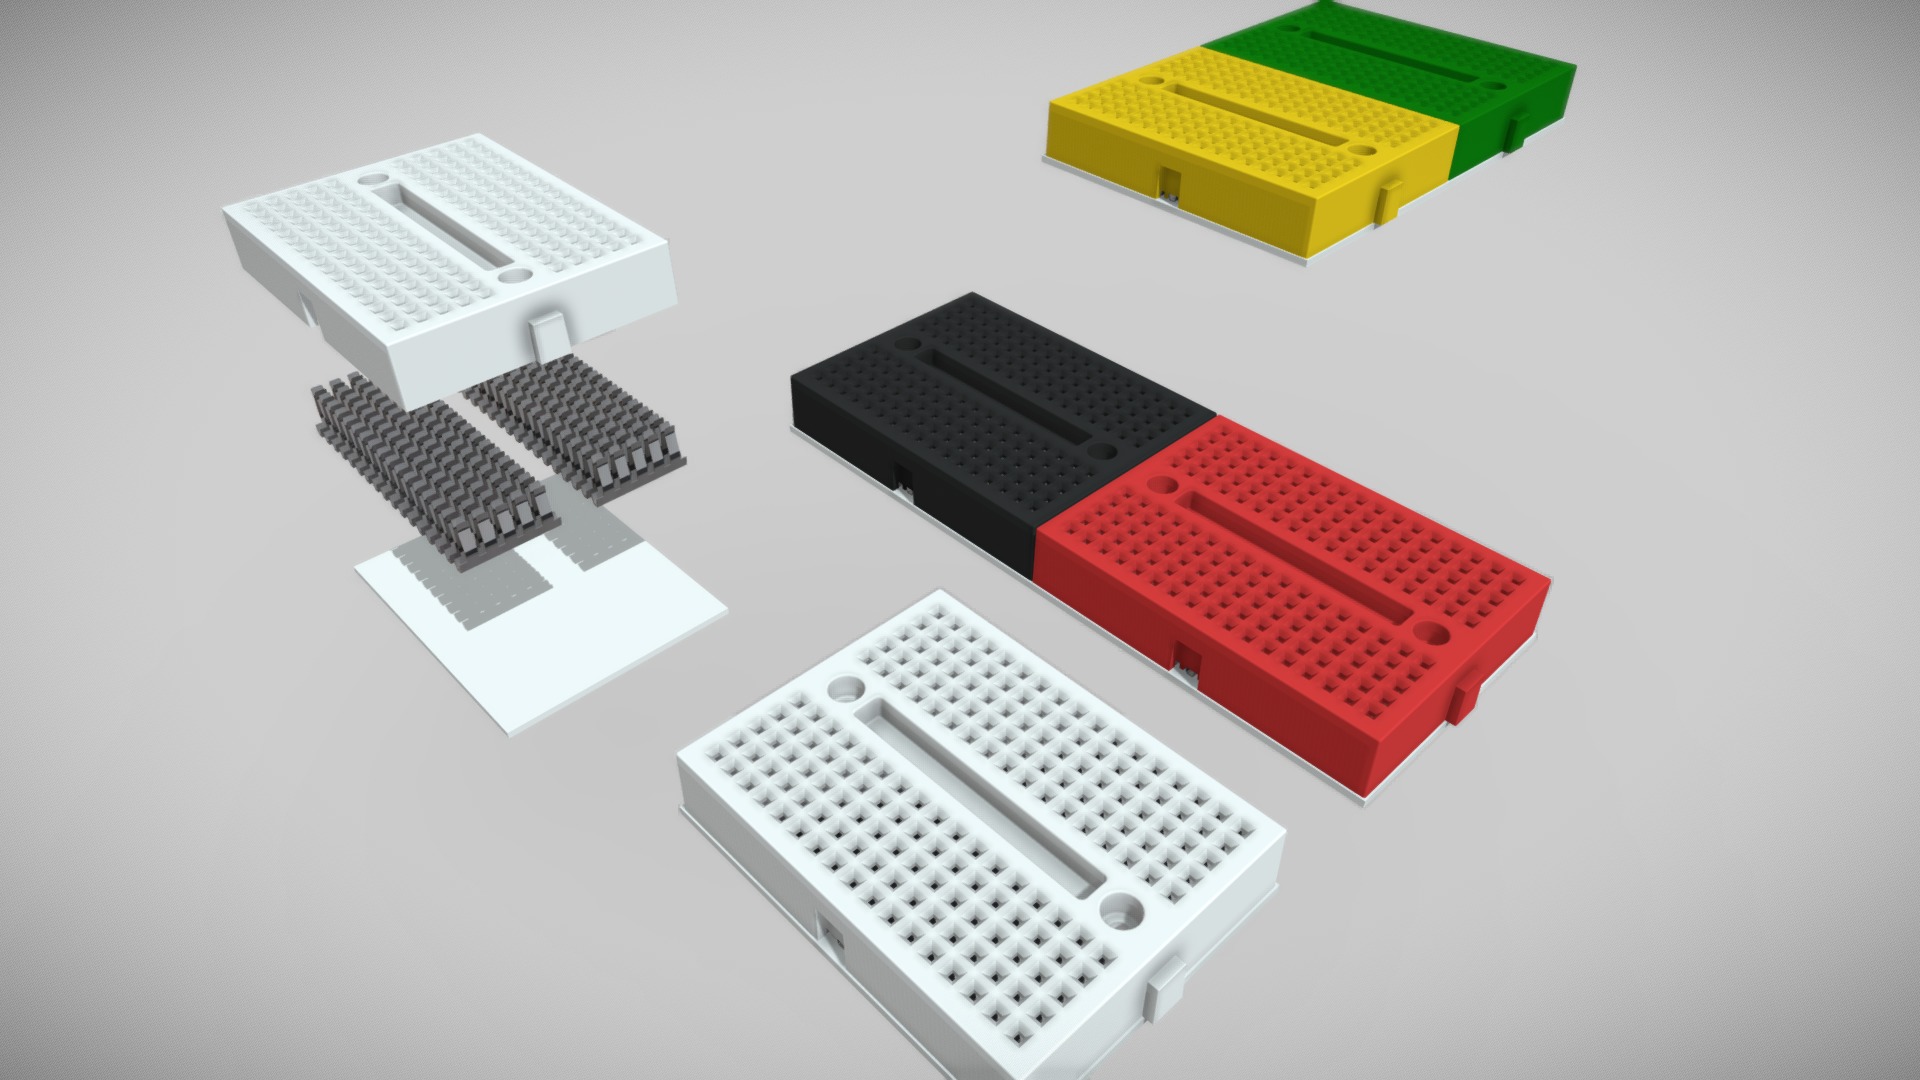 3D model Small Breadboard - This is a 3D model of the Small Breadboard. The 3D model is about several different colored electronic devices.